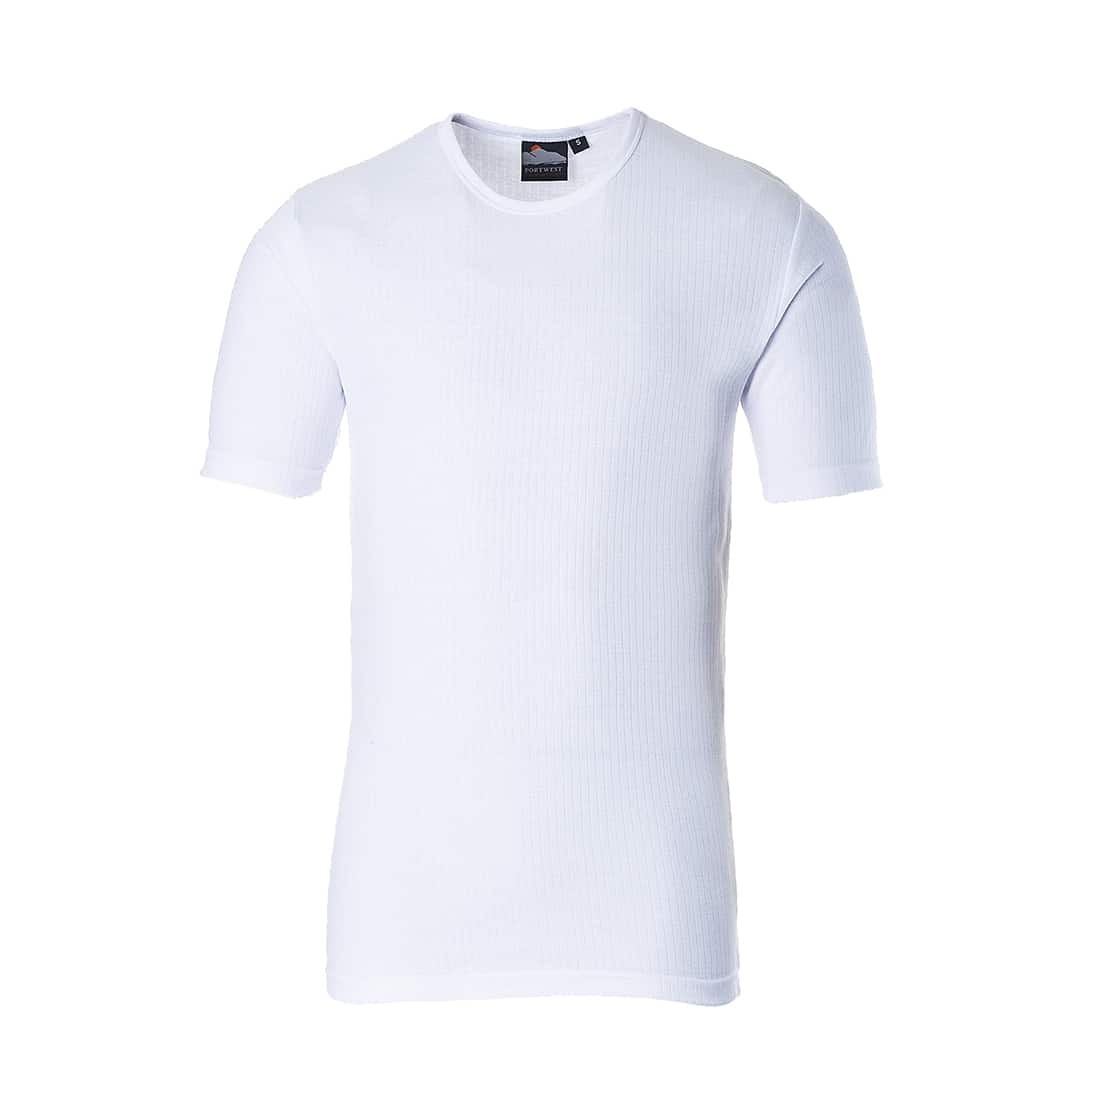 Portwest Thermal T-Shirt S/S